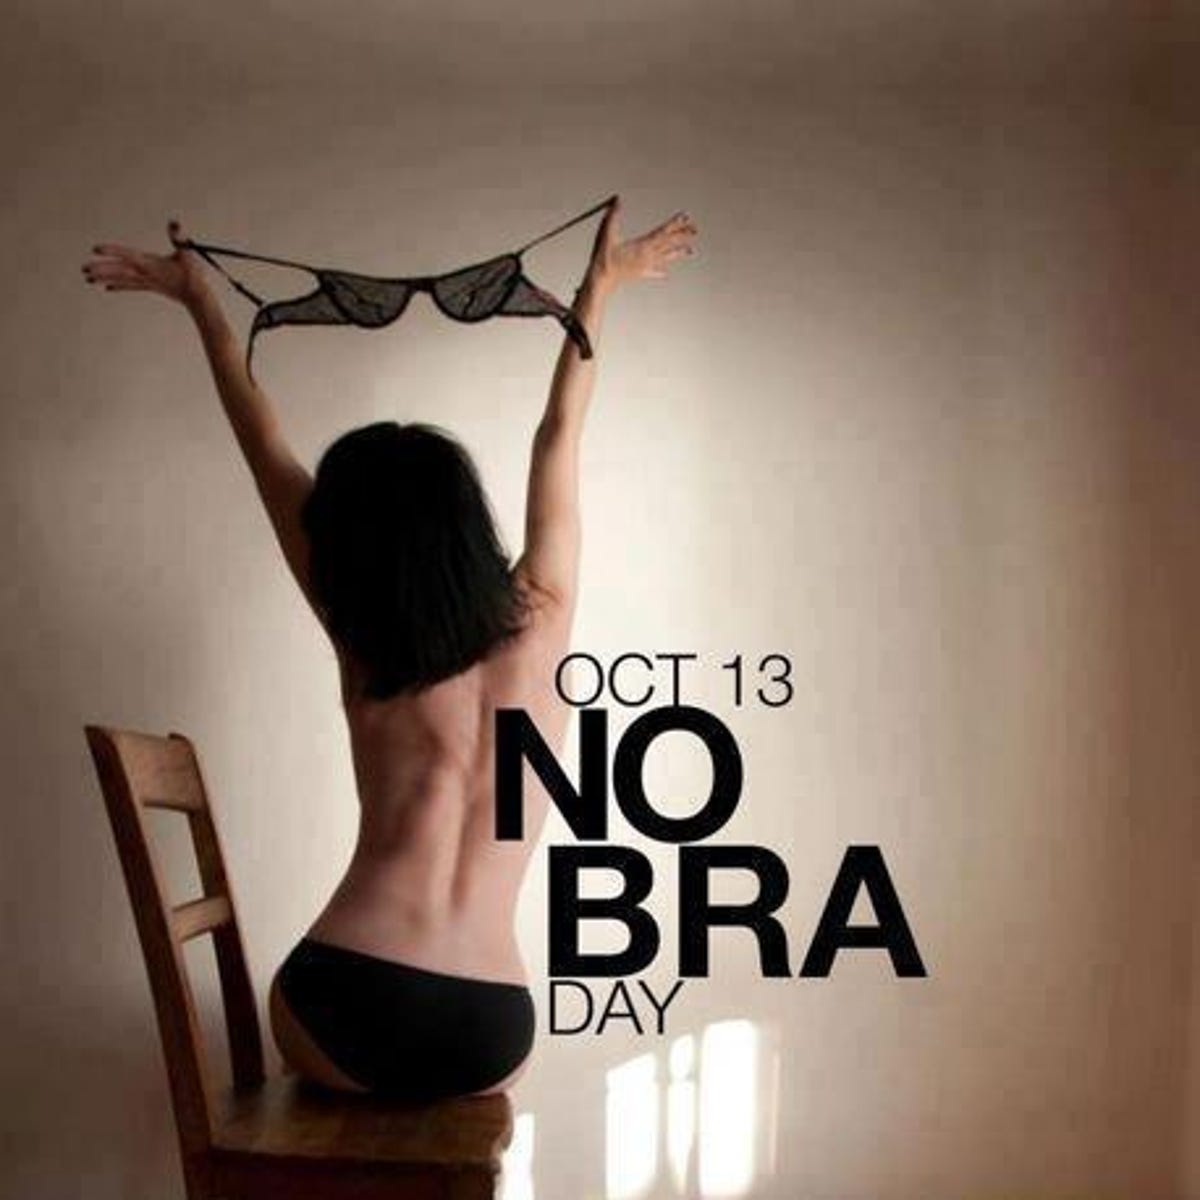 Very distasteful': Not everyone supports #NoBraDay - CNET